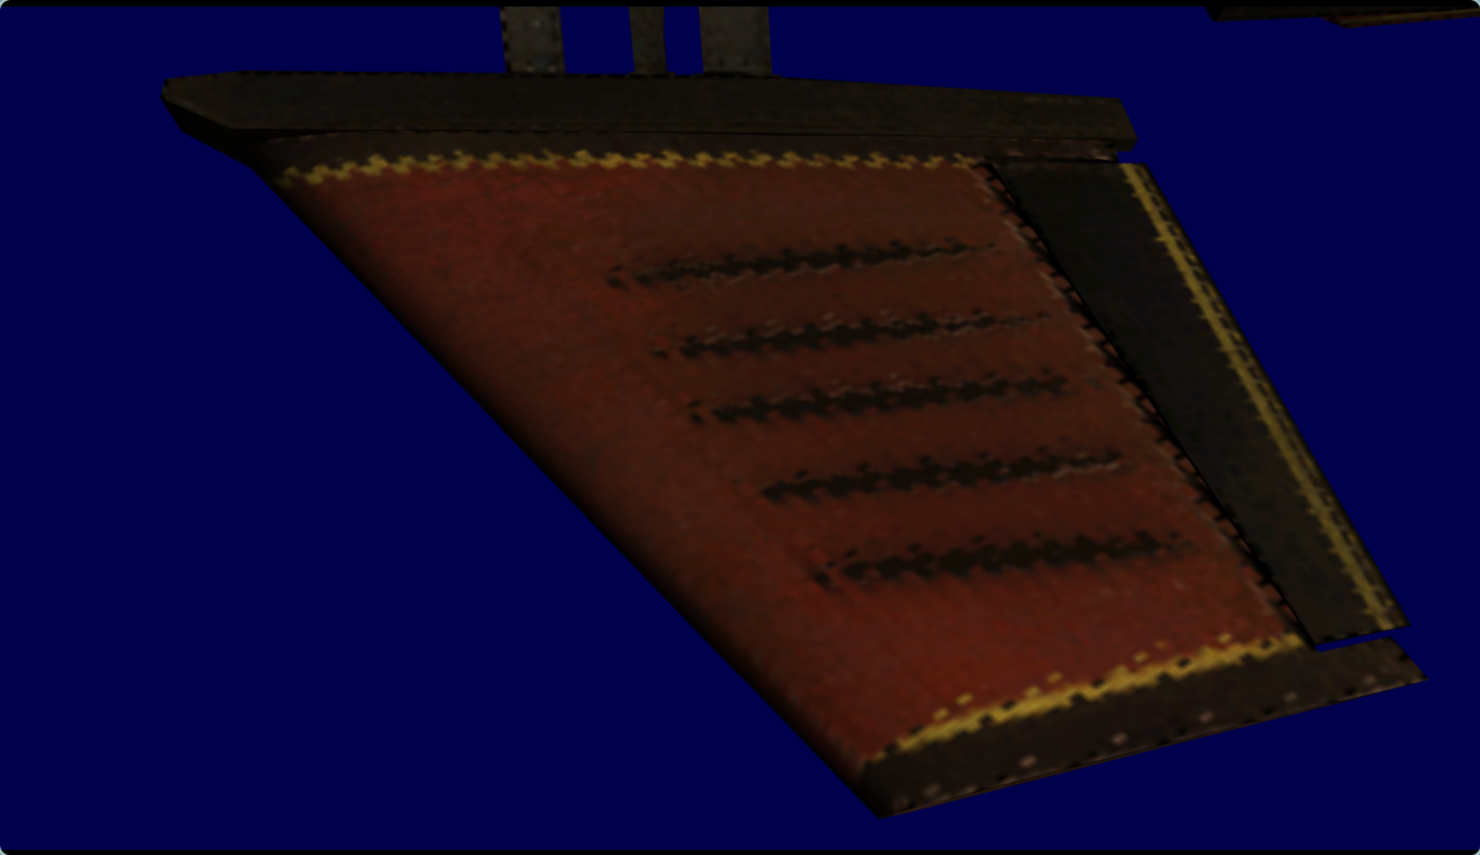 A close-up of a wing from the vehicle, with bizarre texture artifacts